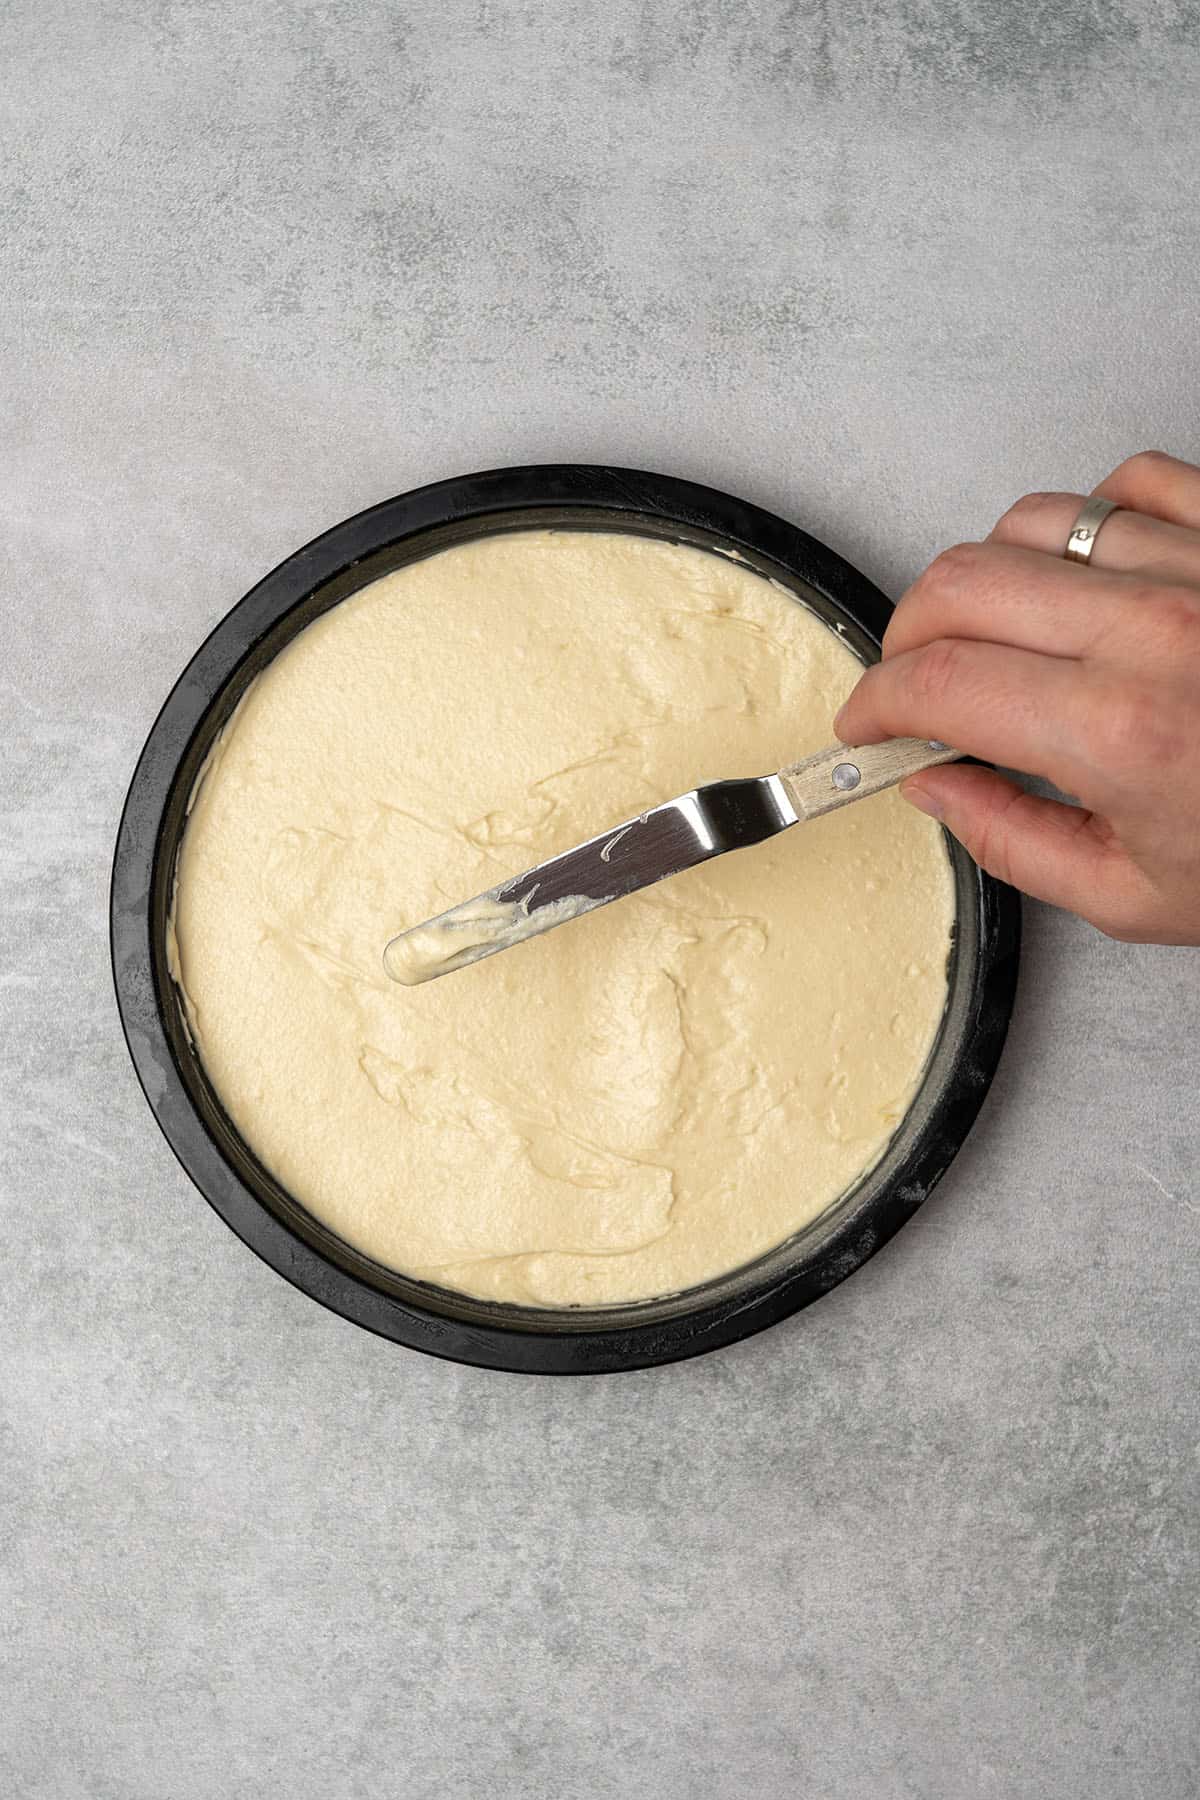 Smoothing the top of the sponge cake batter with an offset spatula before baking